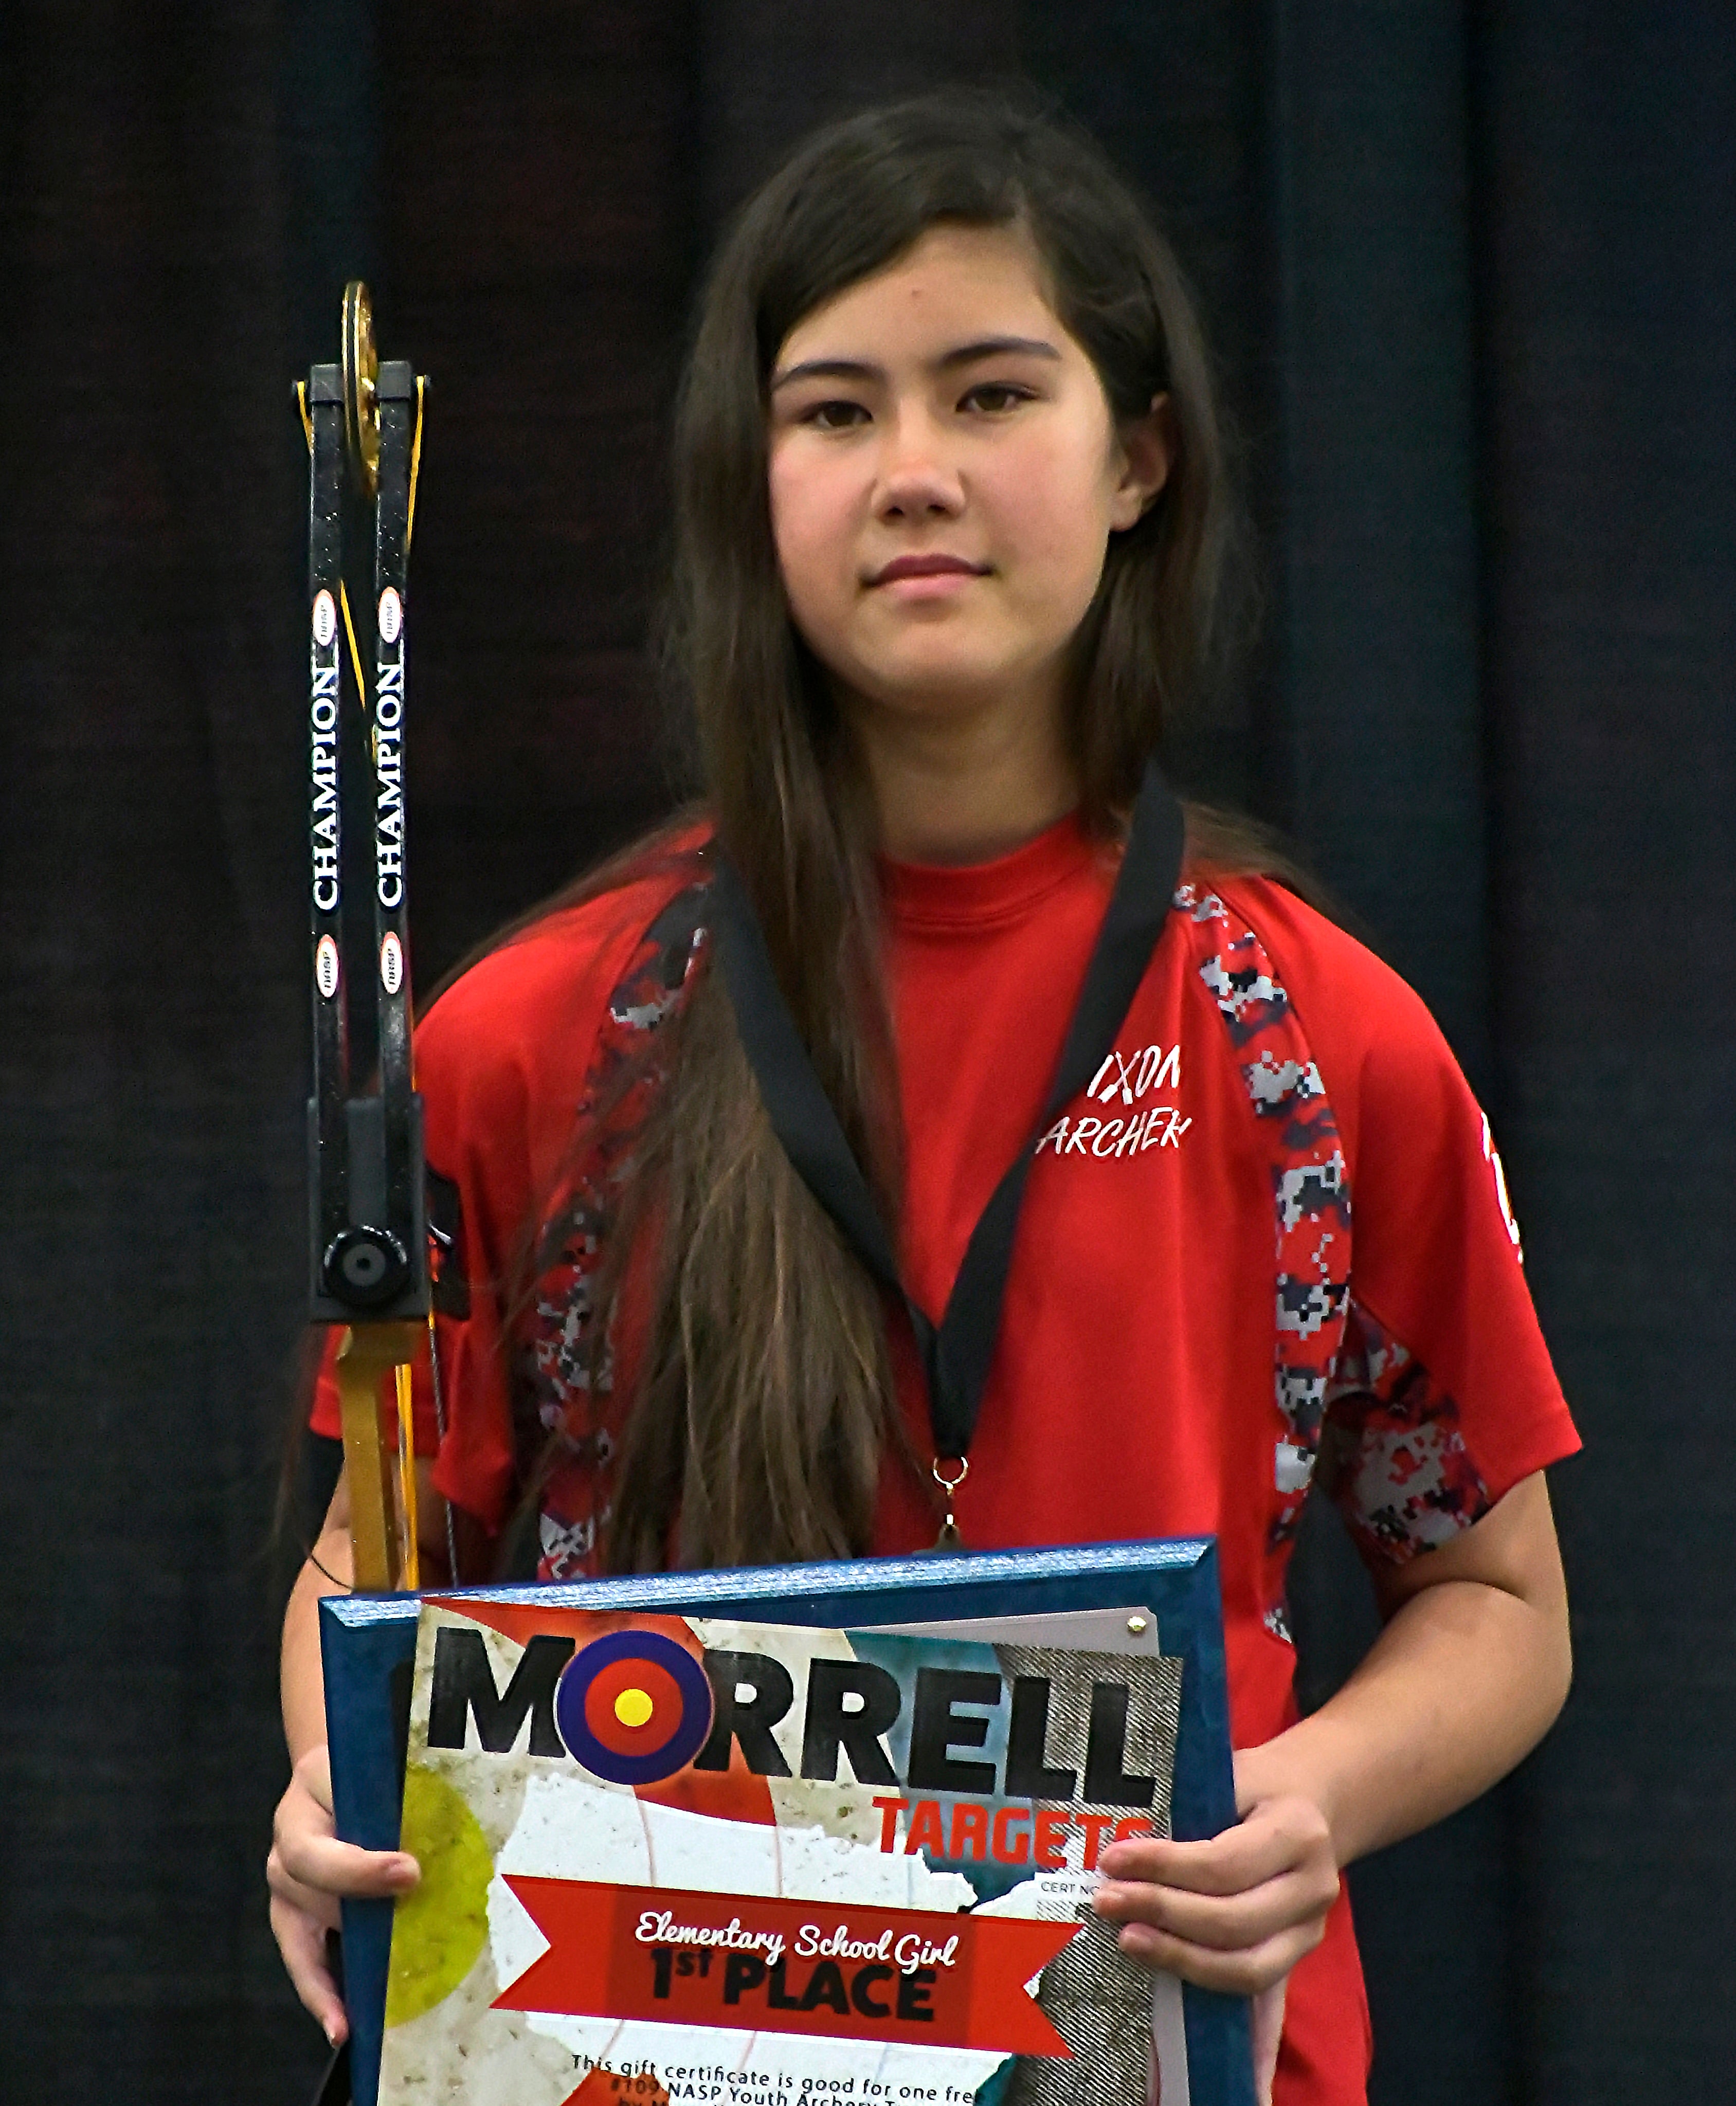 Mia Cornelson shot a 294 out of a possible 300 and was named top female archer in the elementary school division at the NASP Eastern National Tournament.